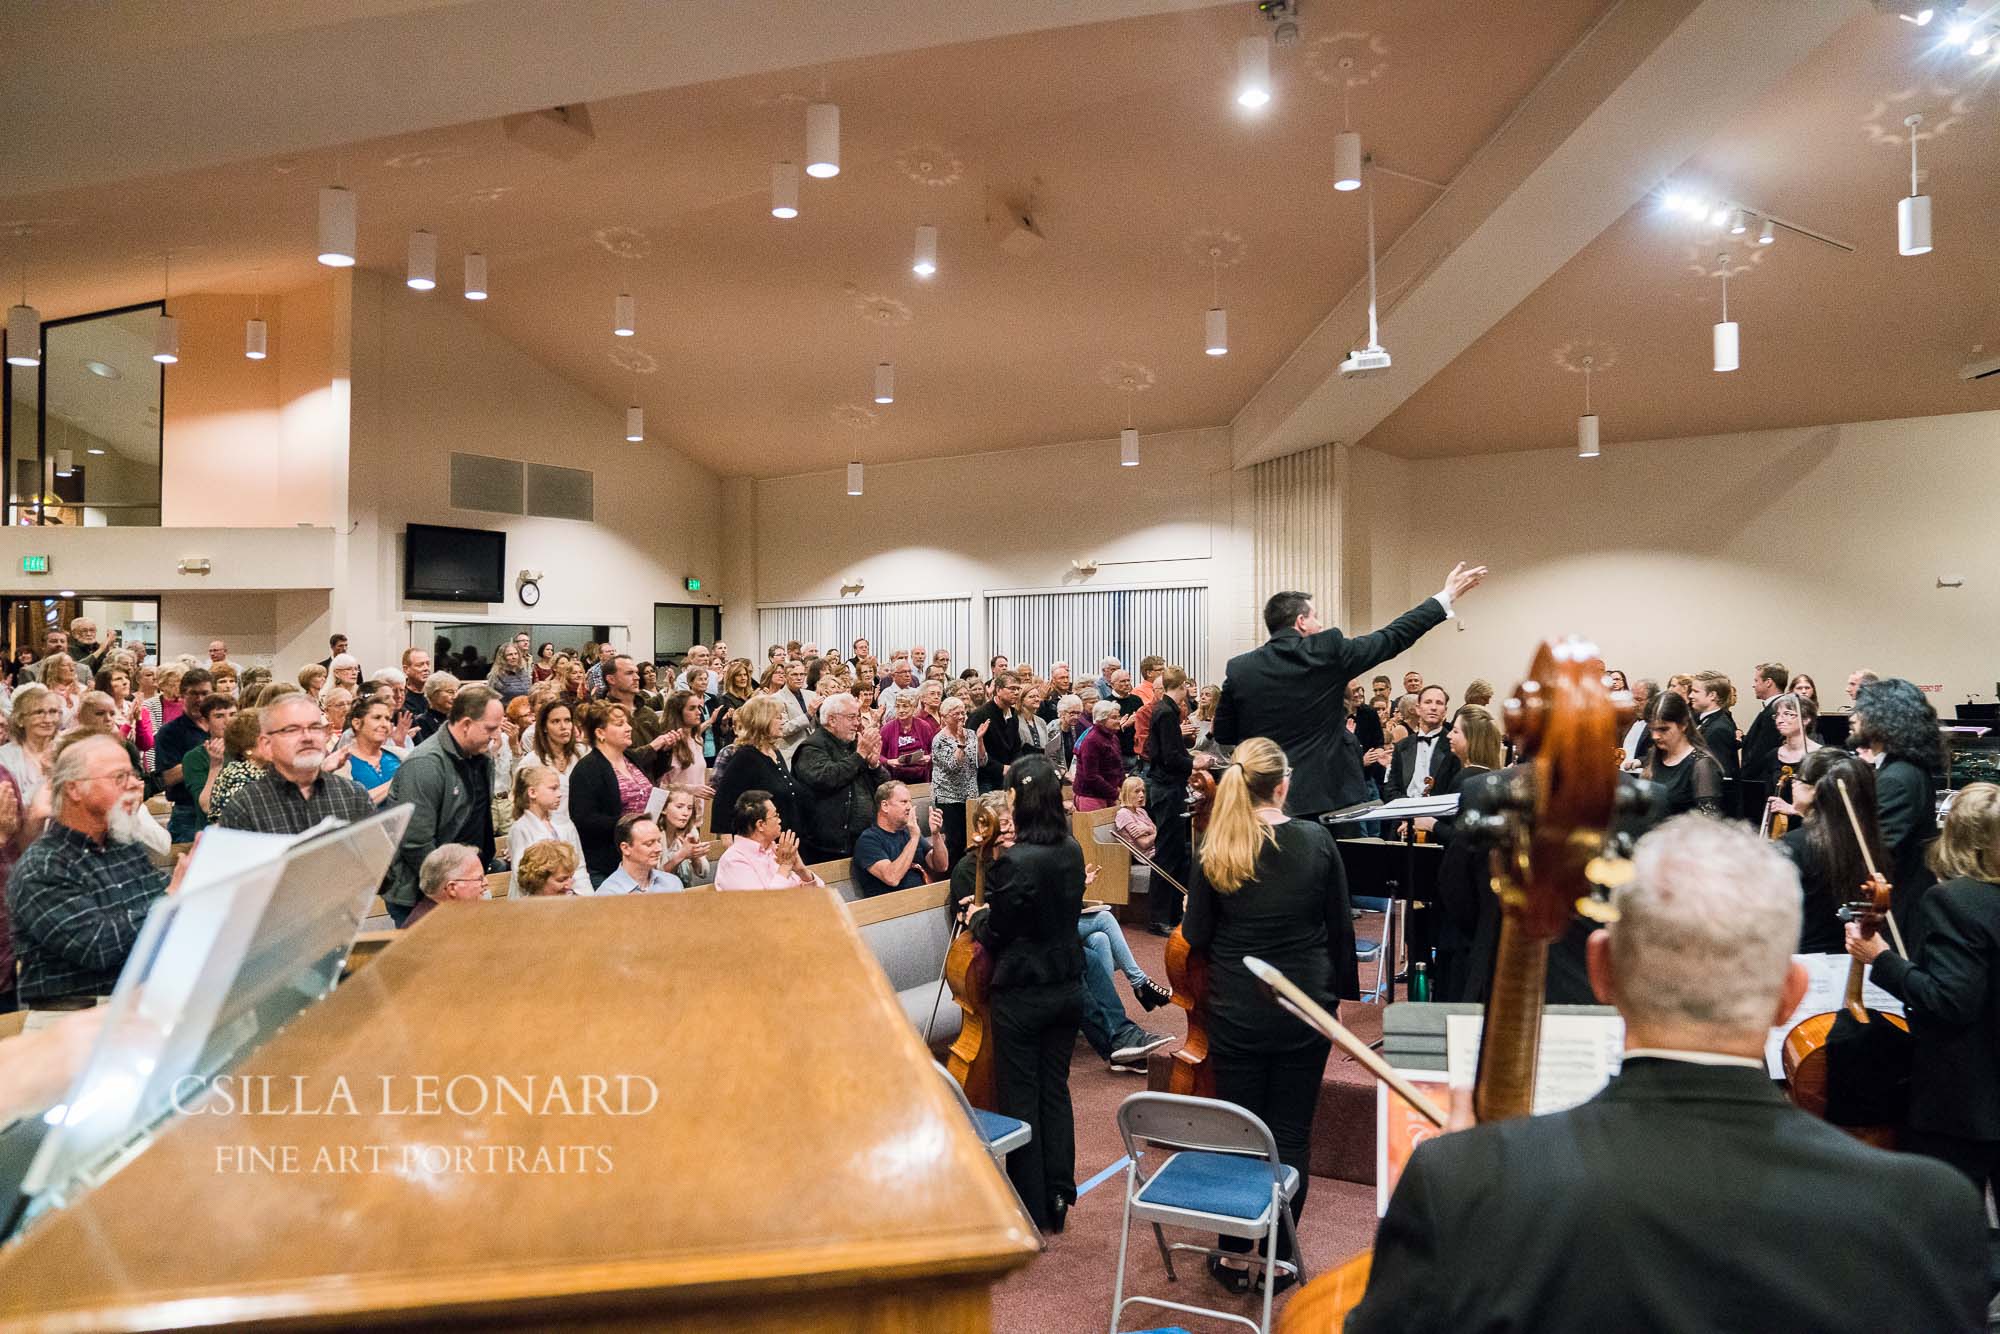 Grand junction photographer shows images of Good Friday concert (54)